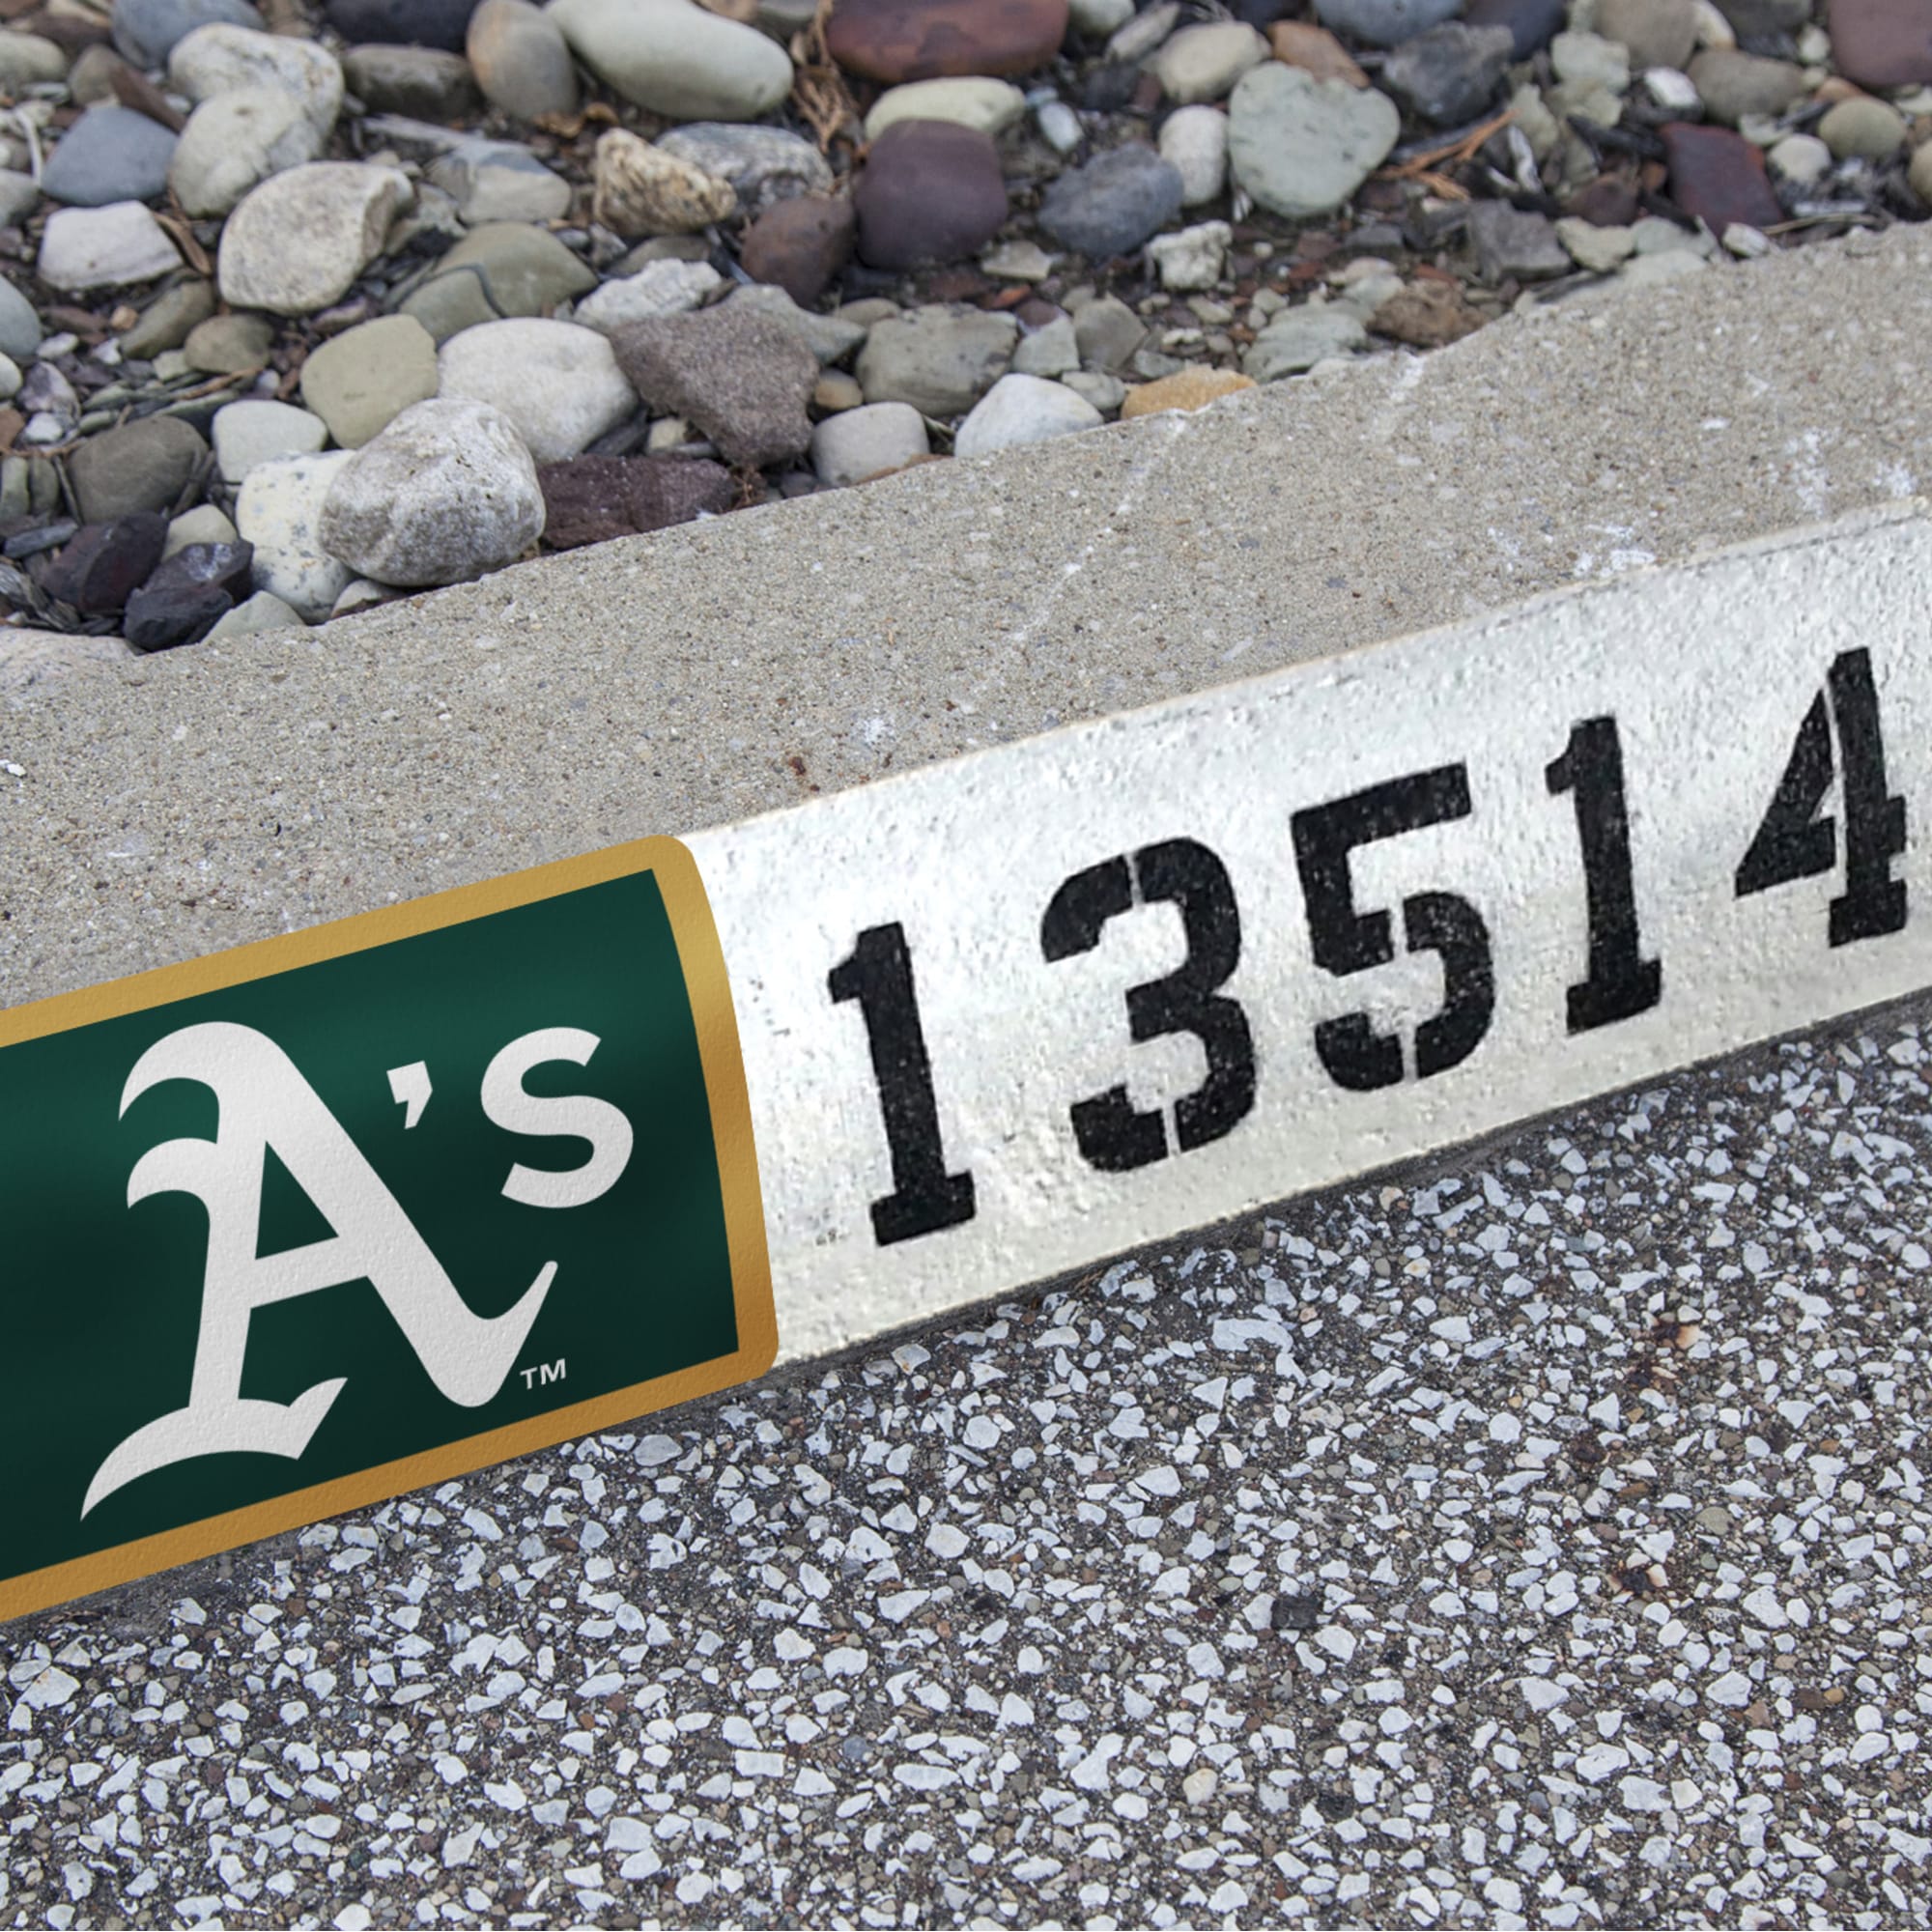 Oakland Athletics: Address Block - Officially Licensed MLB Outdoor Graphic 6.0"W x 8.0"H by Fathead | Wood/Aluminum